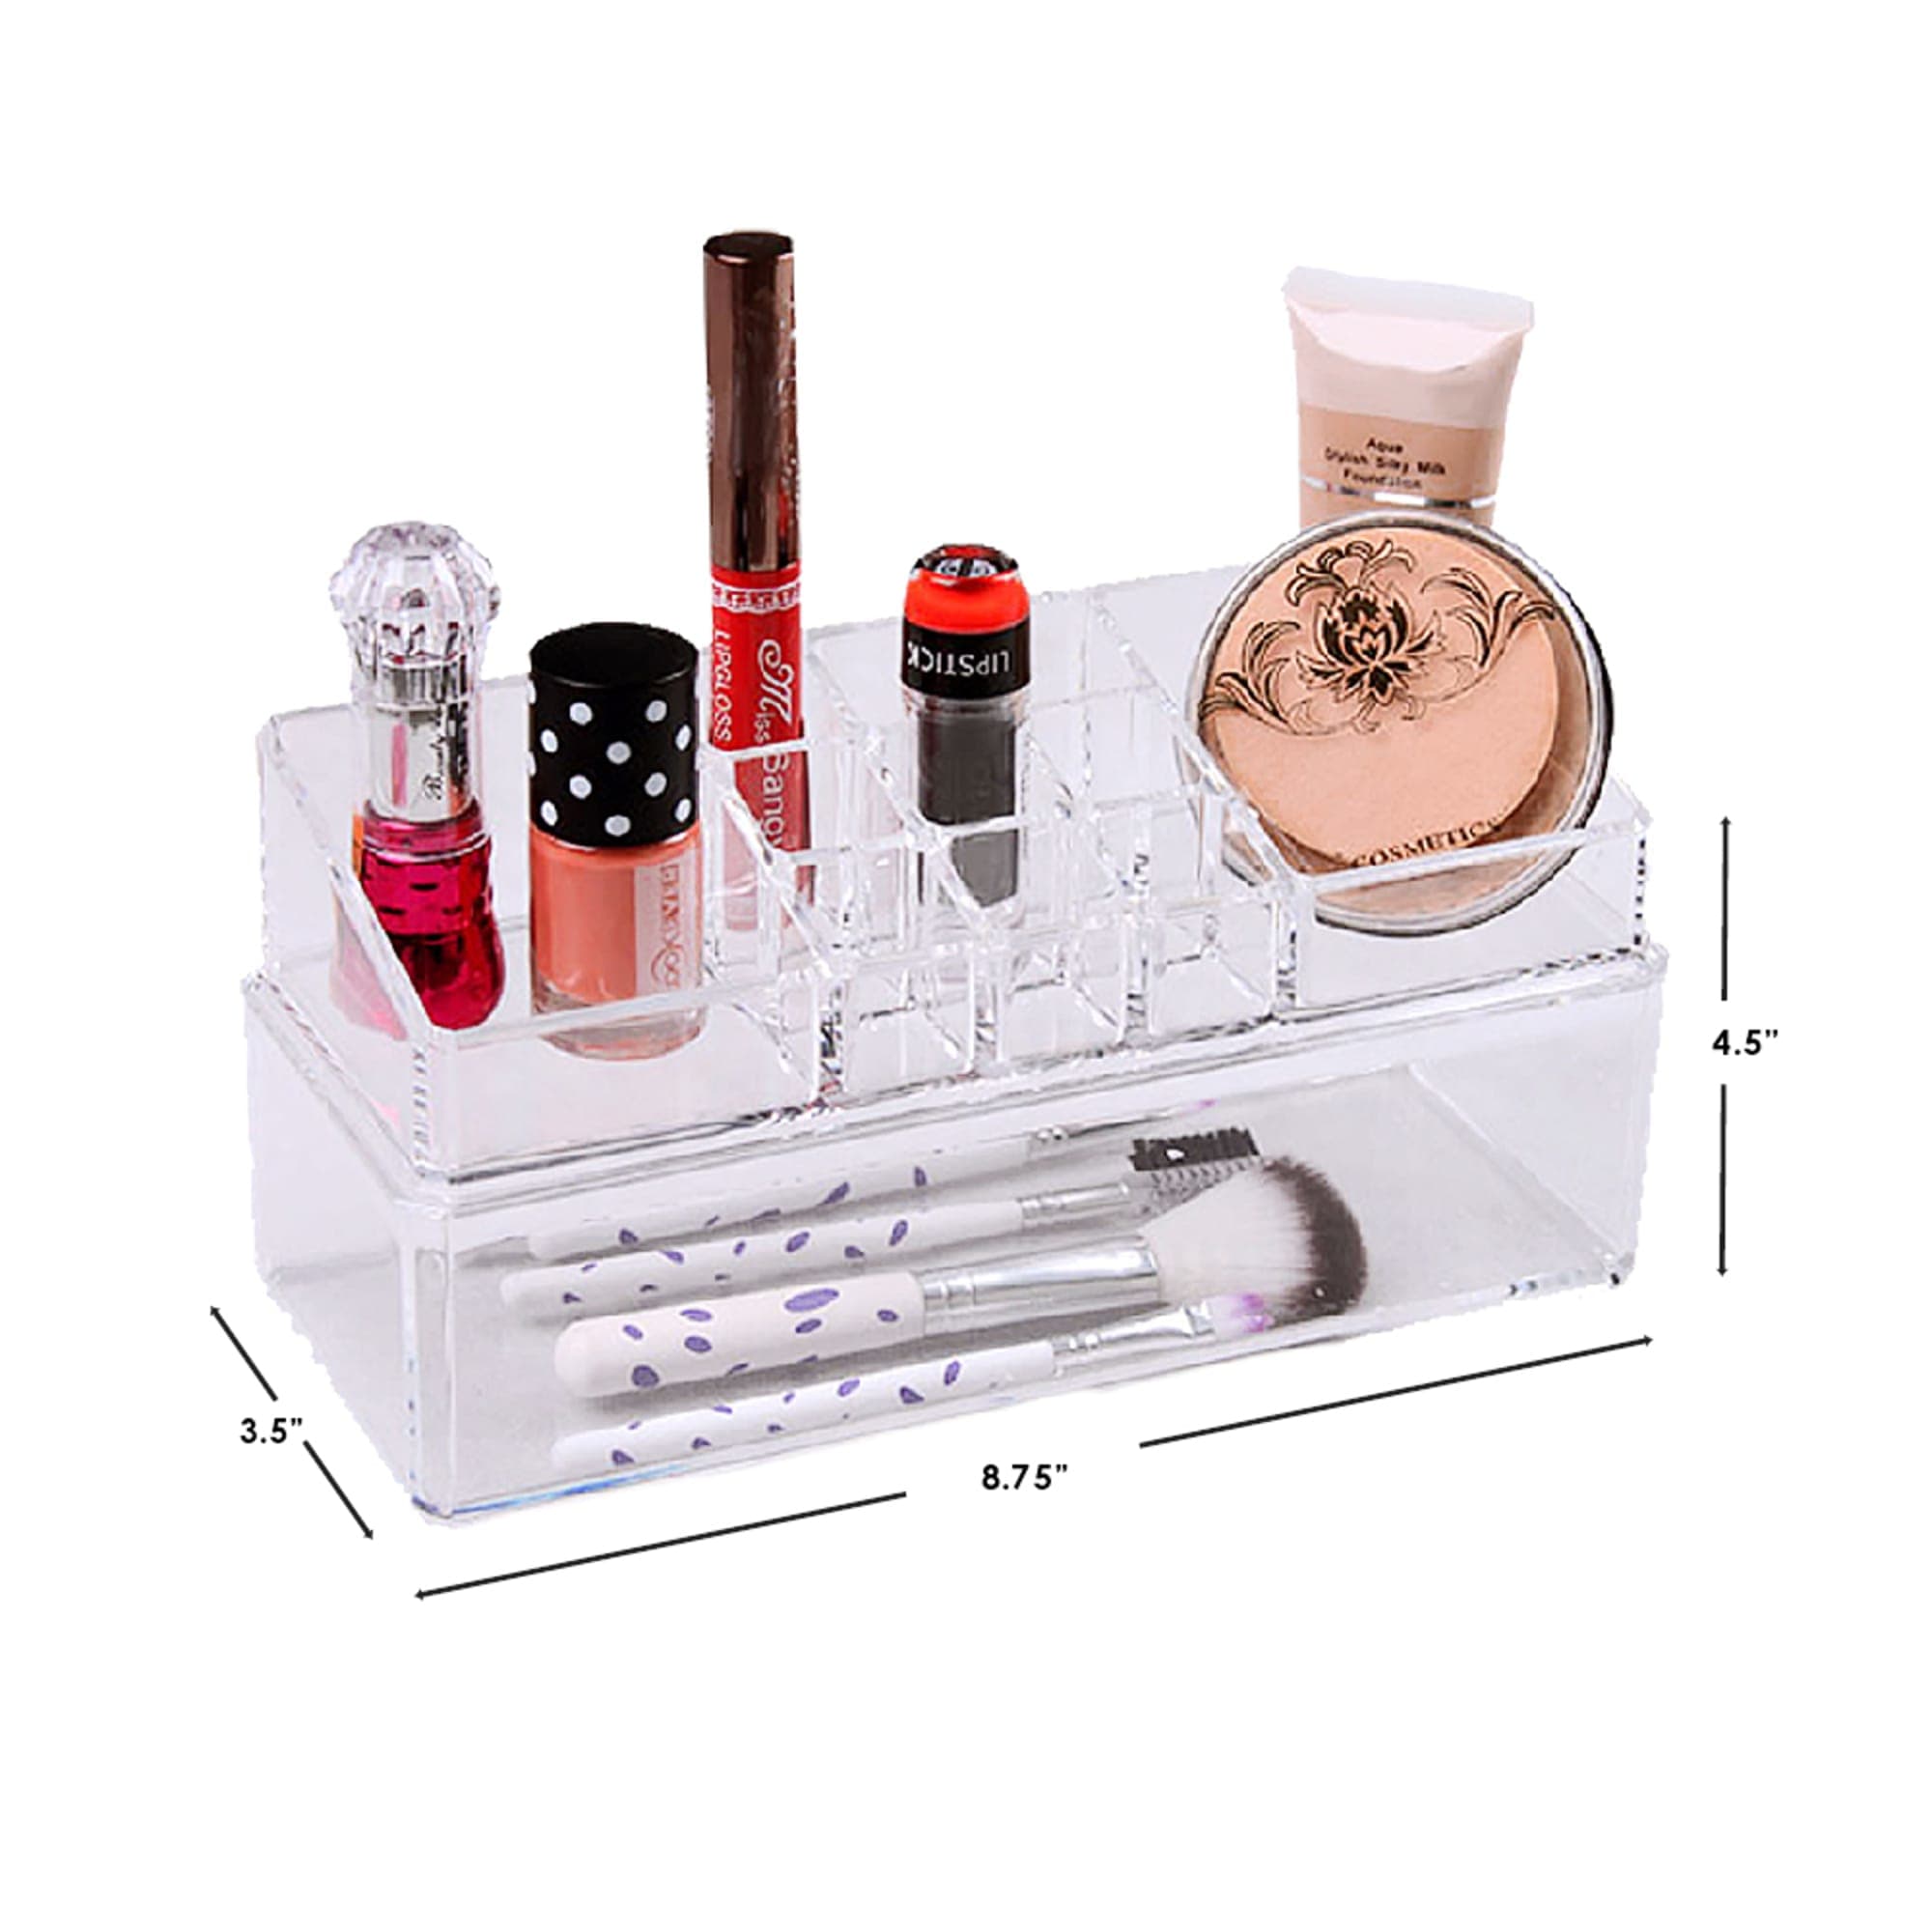 Home Basics Plastic Cosmetic Organizer with Drawer, Clear $5.00 EACH, CASE PACK OF 12